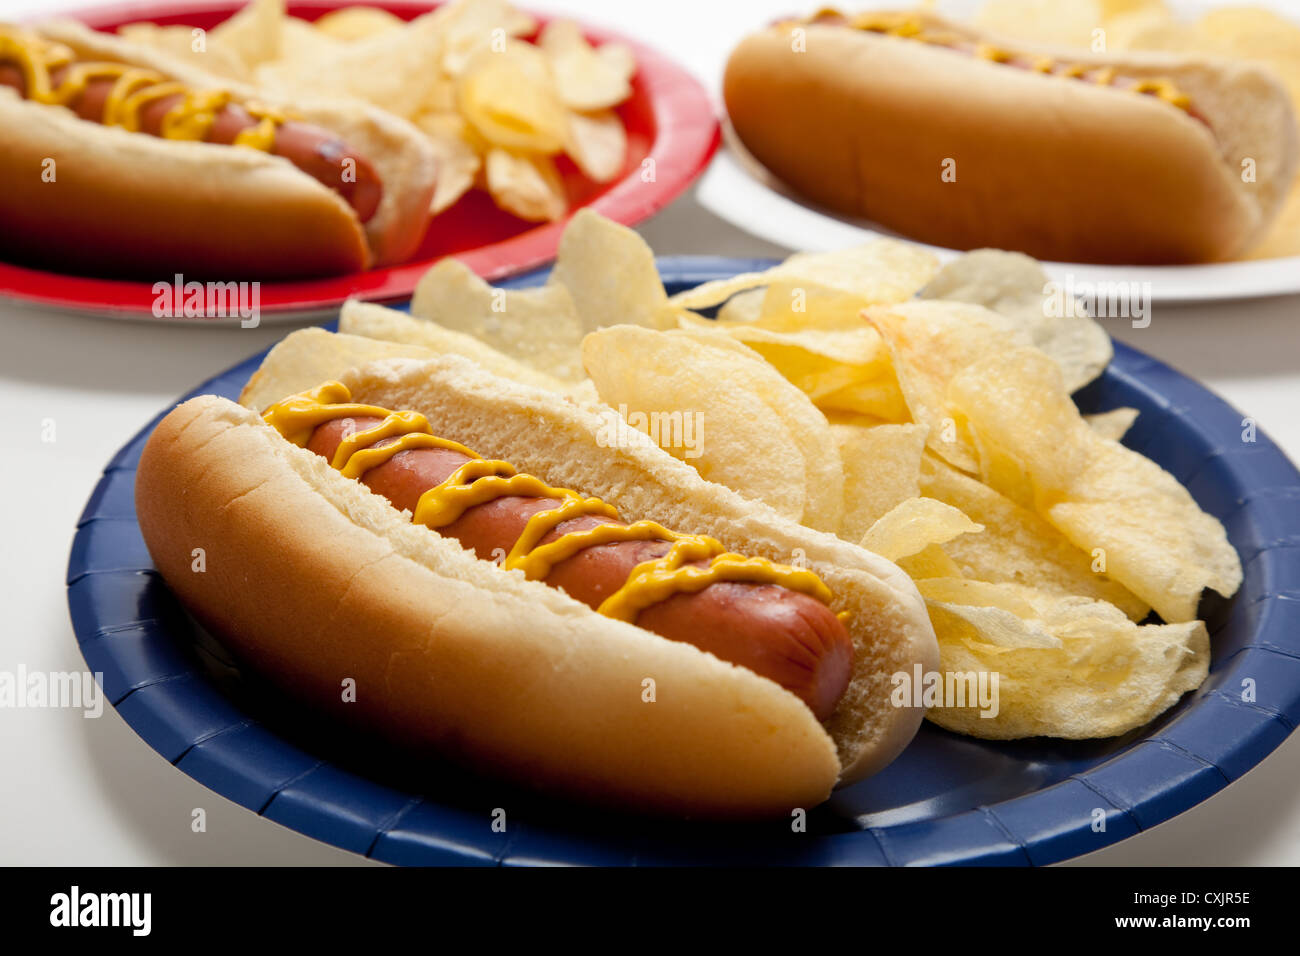 Red, white and blue plates with hot dogs and mustard and potato chips Stock Photo